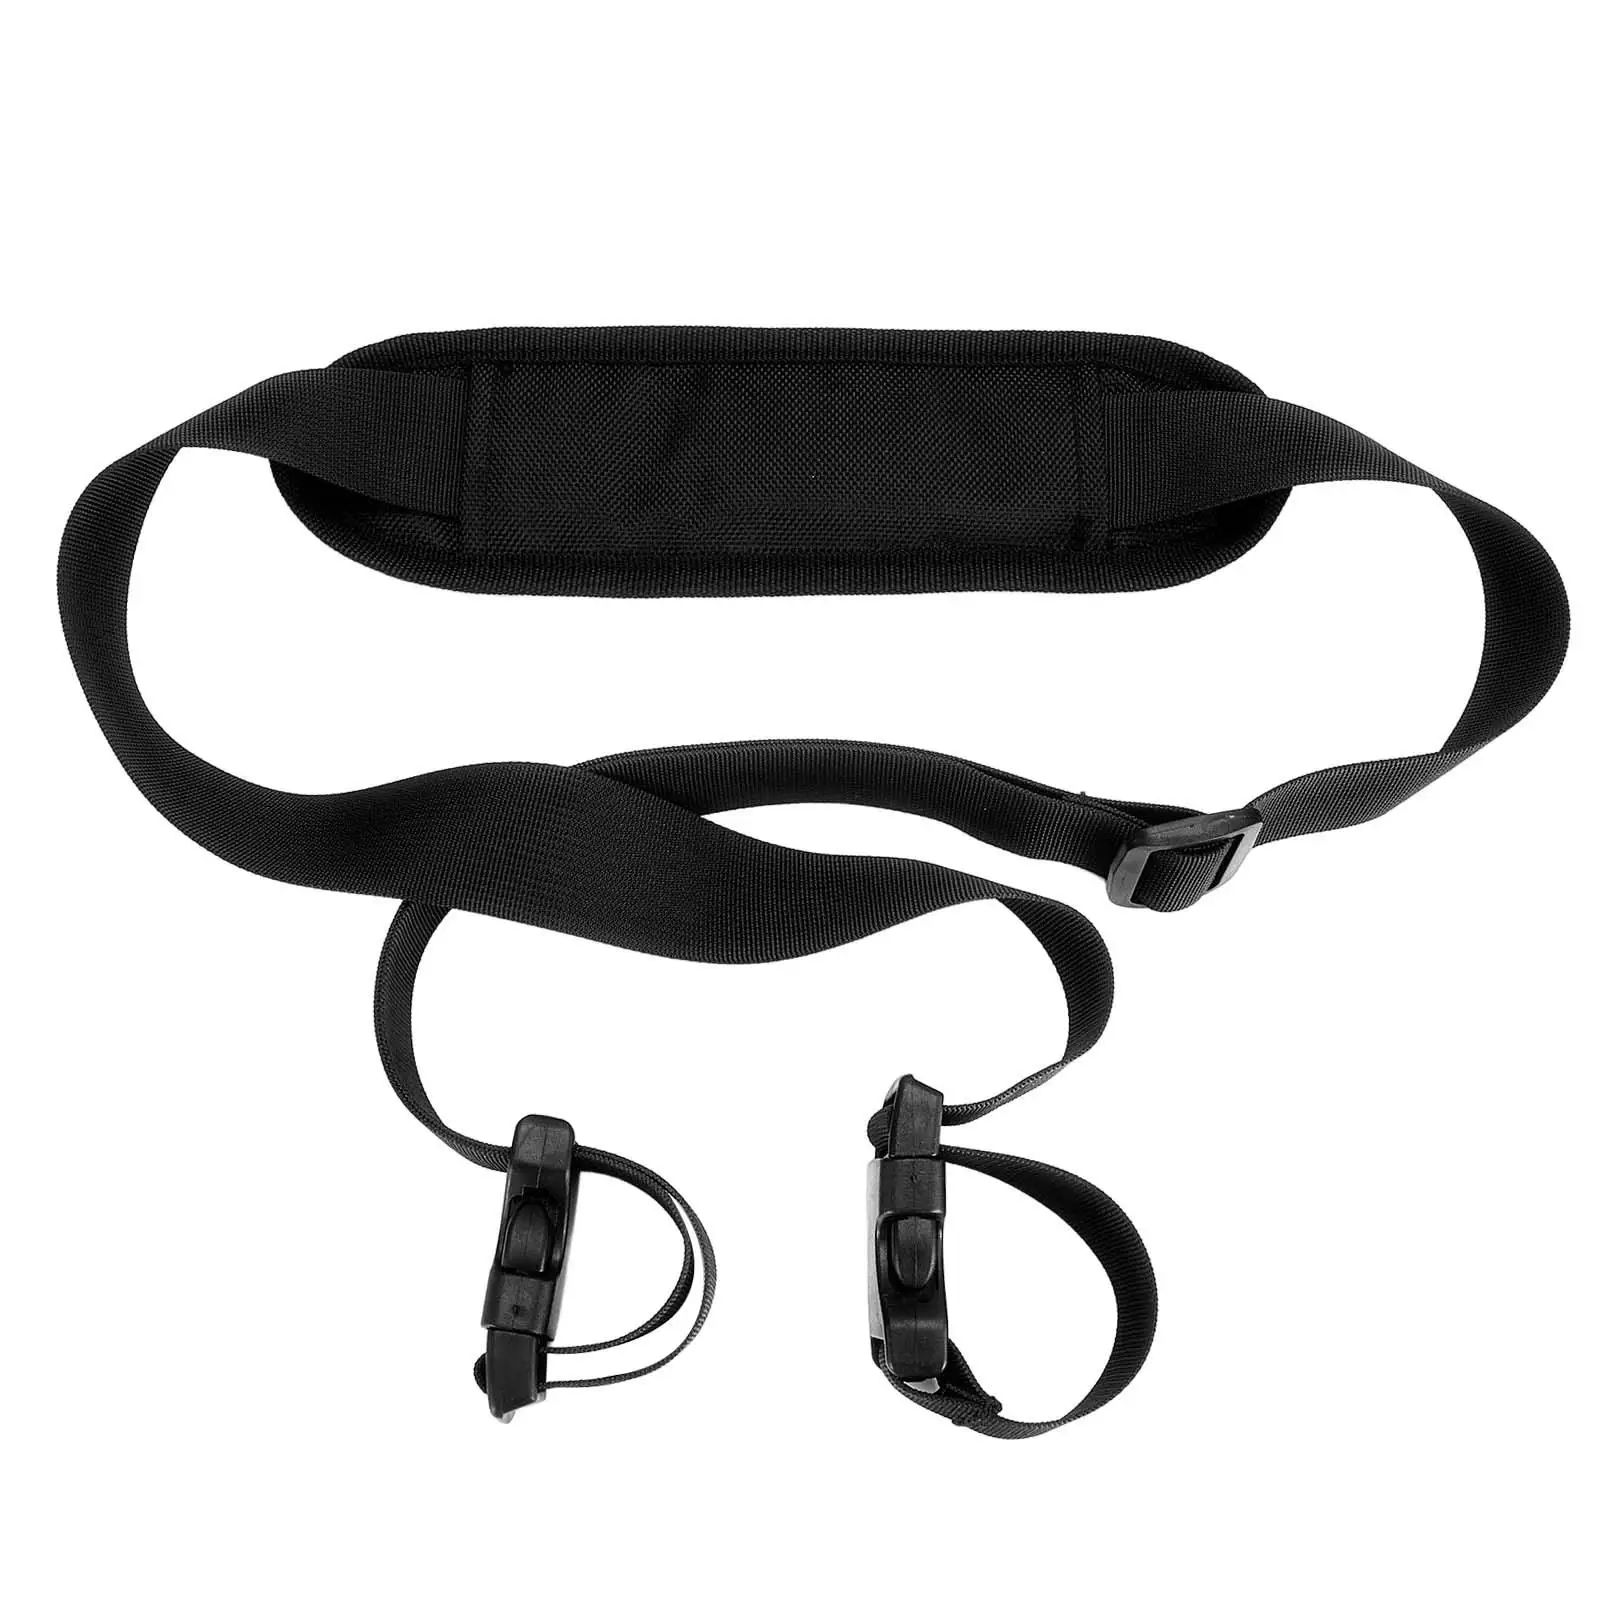 Scooter Shoulder Strap Durable Lightweight Carry Belt for Scooter Accessories